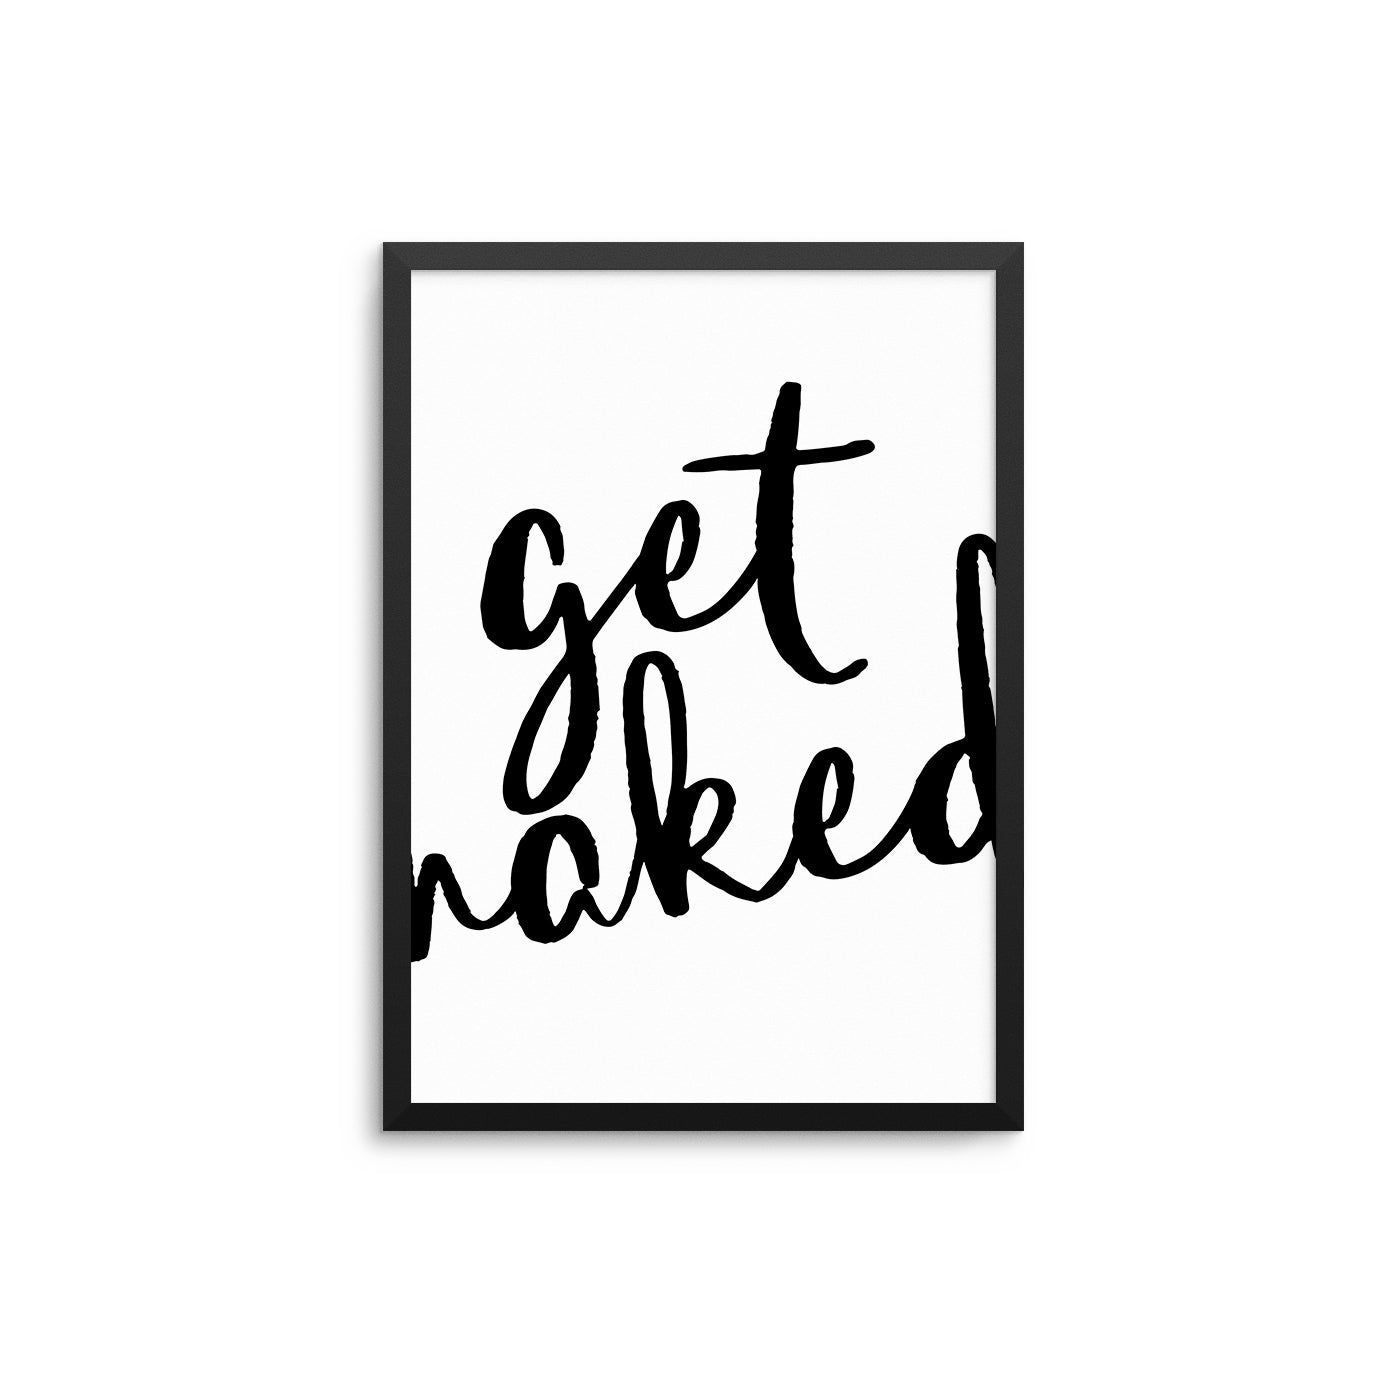 Get Naked - D'Luxe Prints